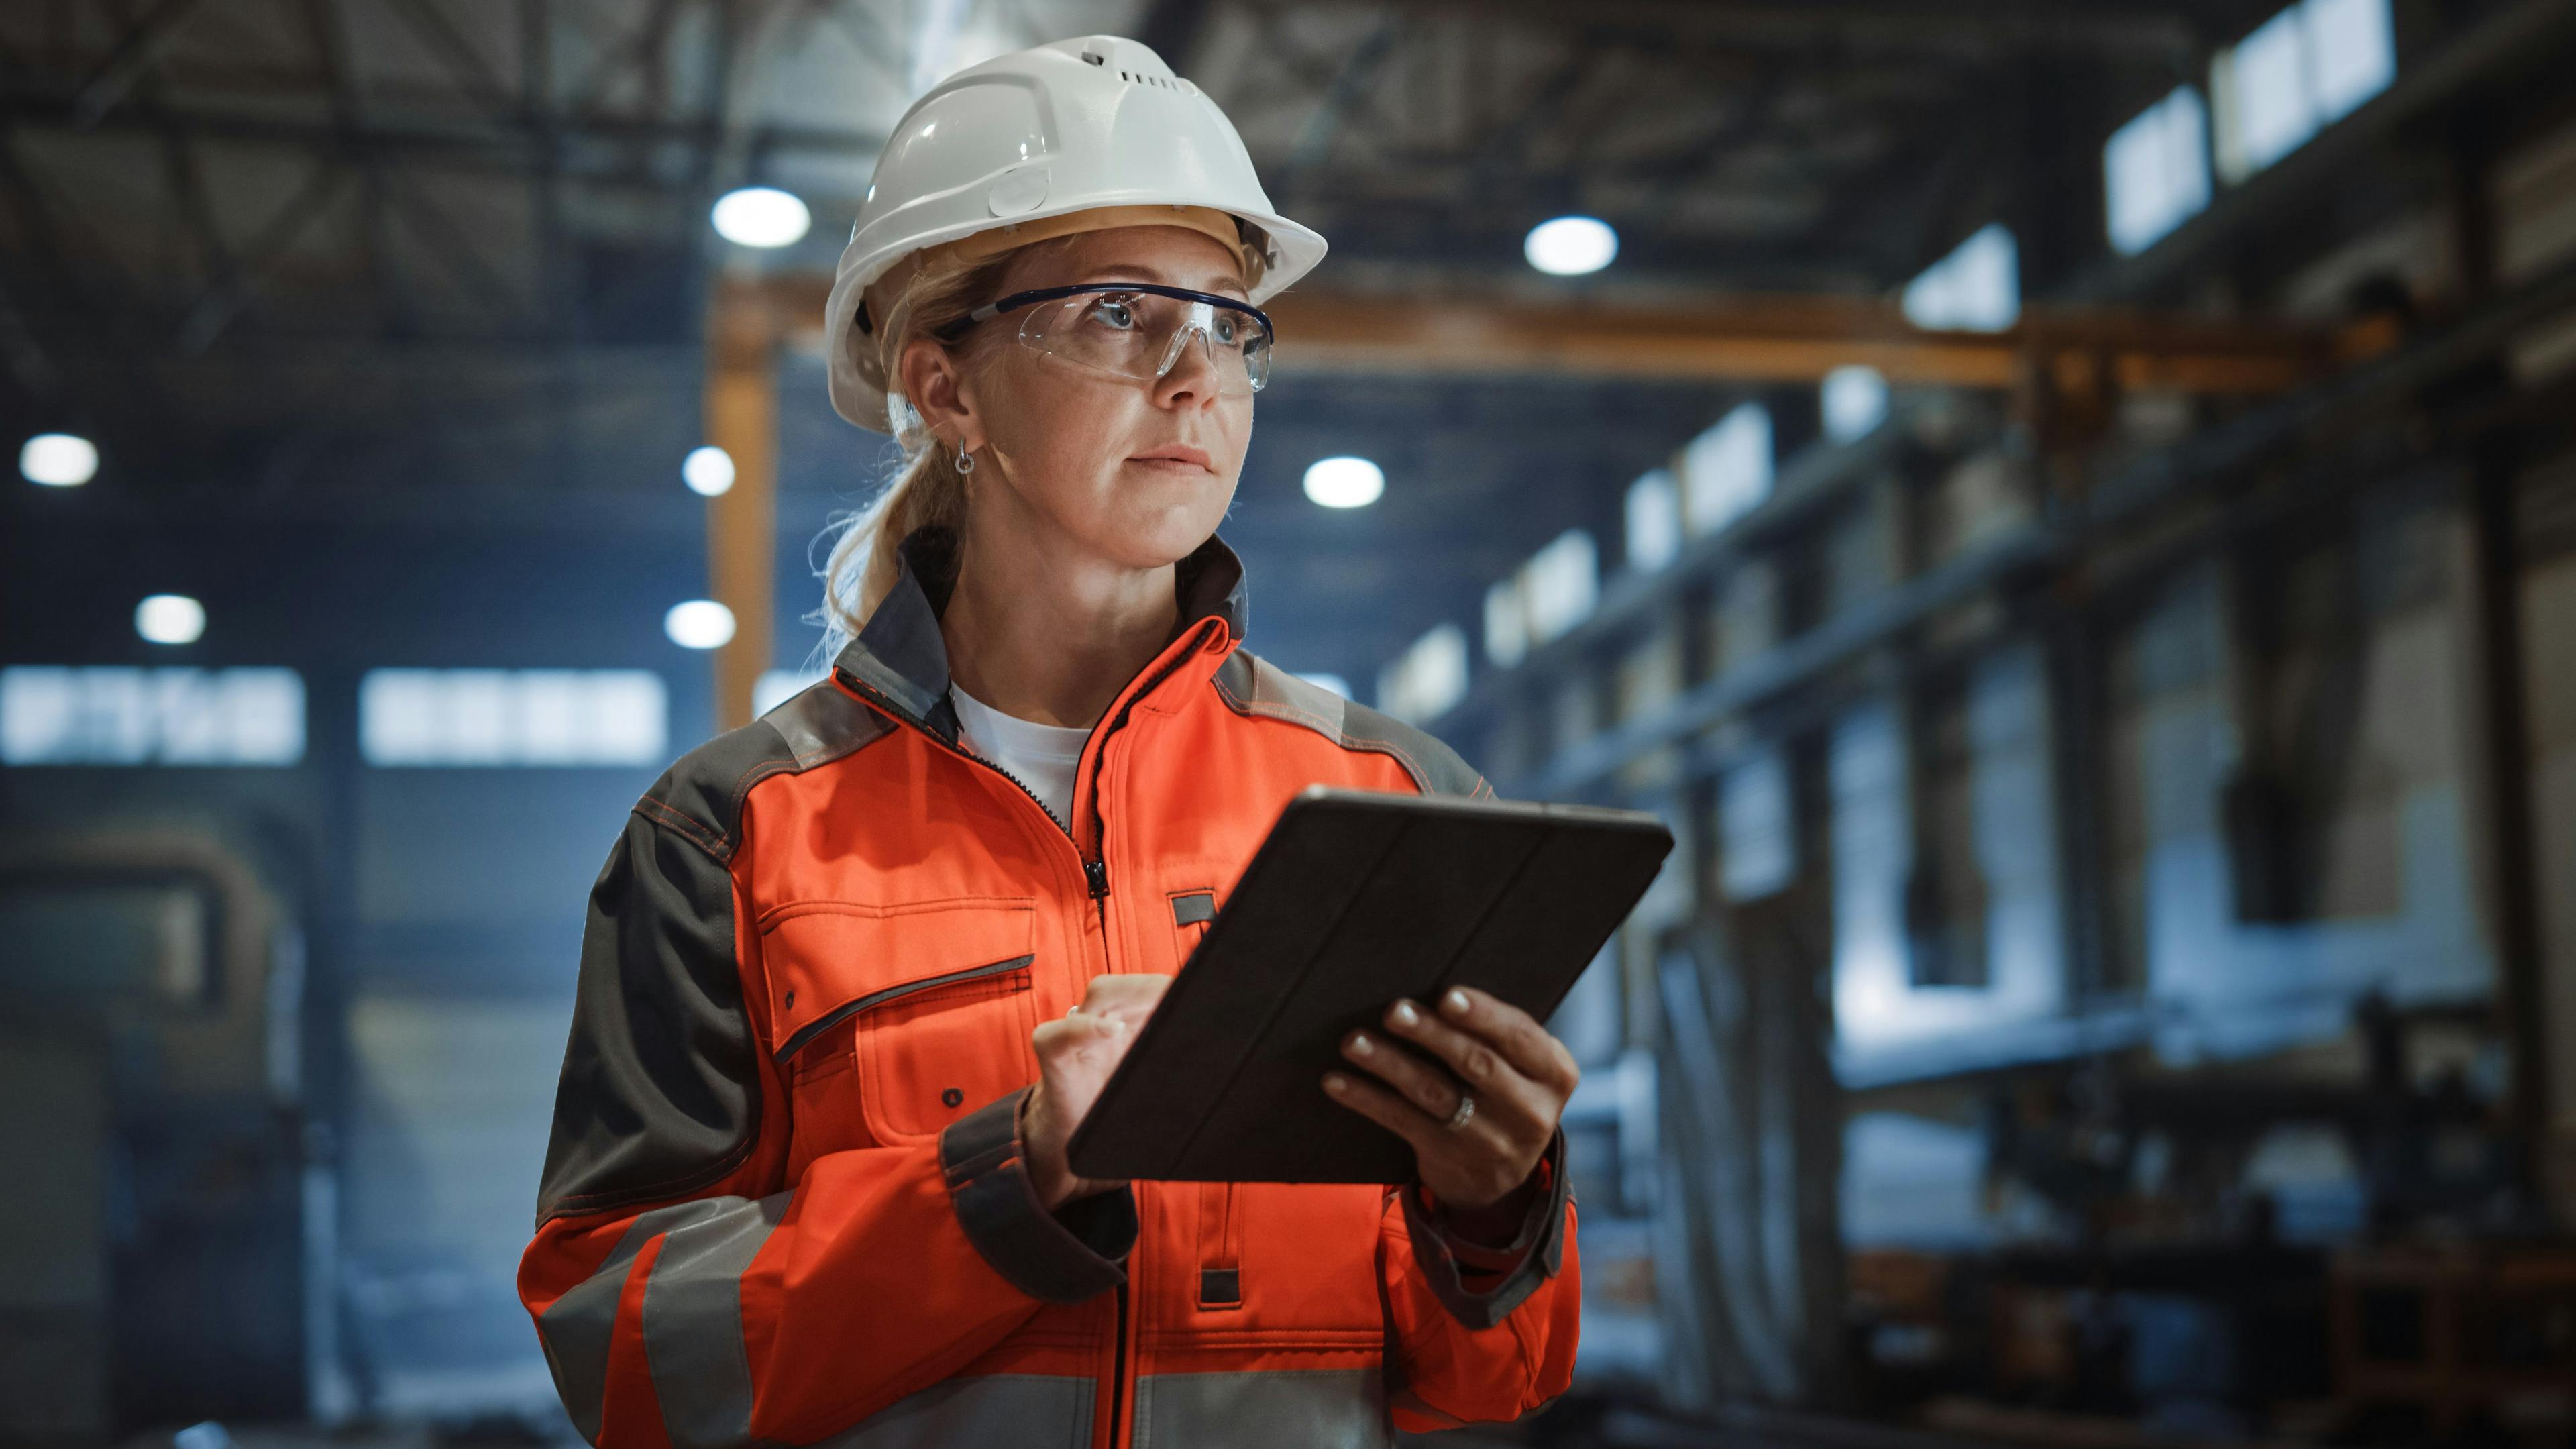 Professional Heavy Industry Engineer/Worker Wearing Safety Uniform and Hard Hat Uses Tablet Computer. Serious Successful Female Industrial Specialist Walking in a Metal Manufacture Warehouse. | Image Credit: © Gorodenkoff - stock.adobe.com